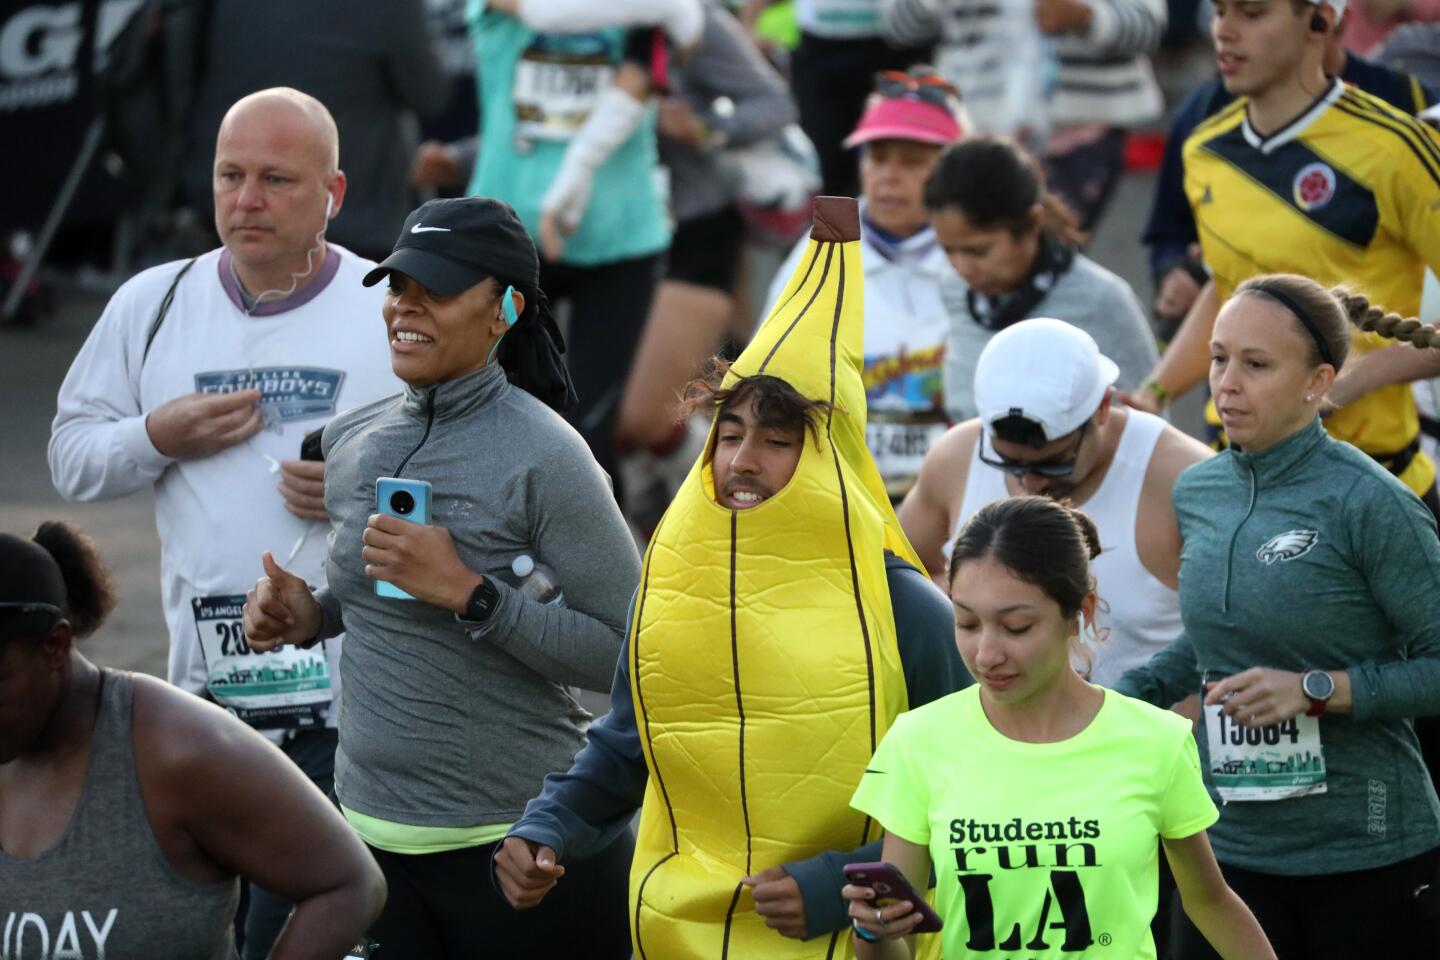 It's not a marathon without costumed runners at the 2020 L.A. Marathon at Dodger Stadium.